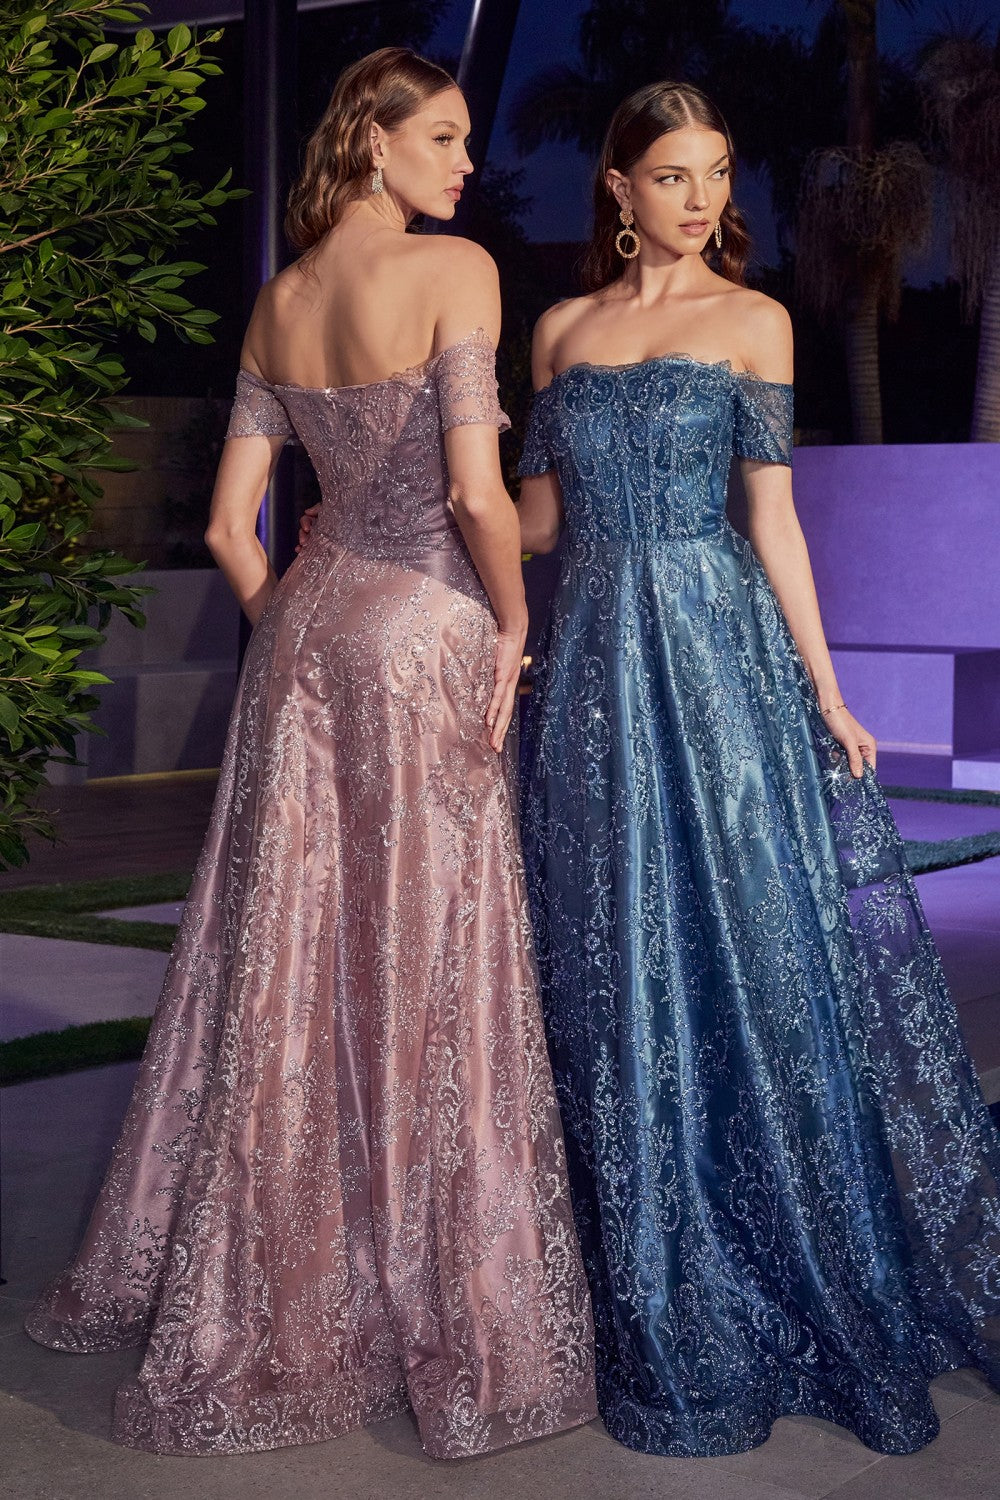 Off The Shoulder Sheer Sequin Bodice Appliqué glitter print a-line Prom & Bridesmaid gown Evening Gala Luxury Formal Dress CDJ835-2